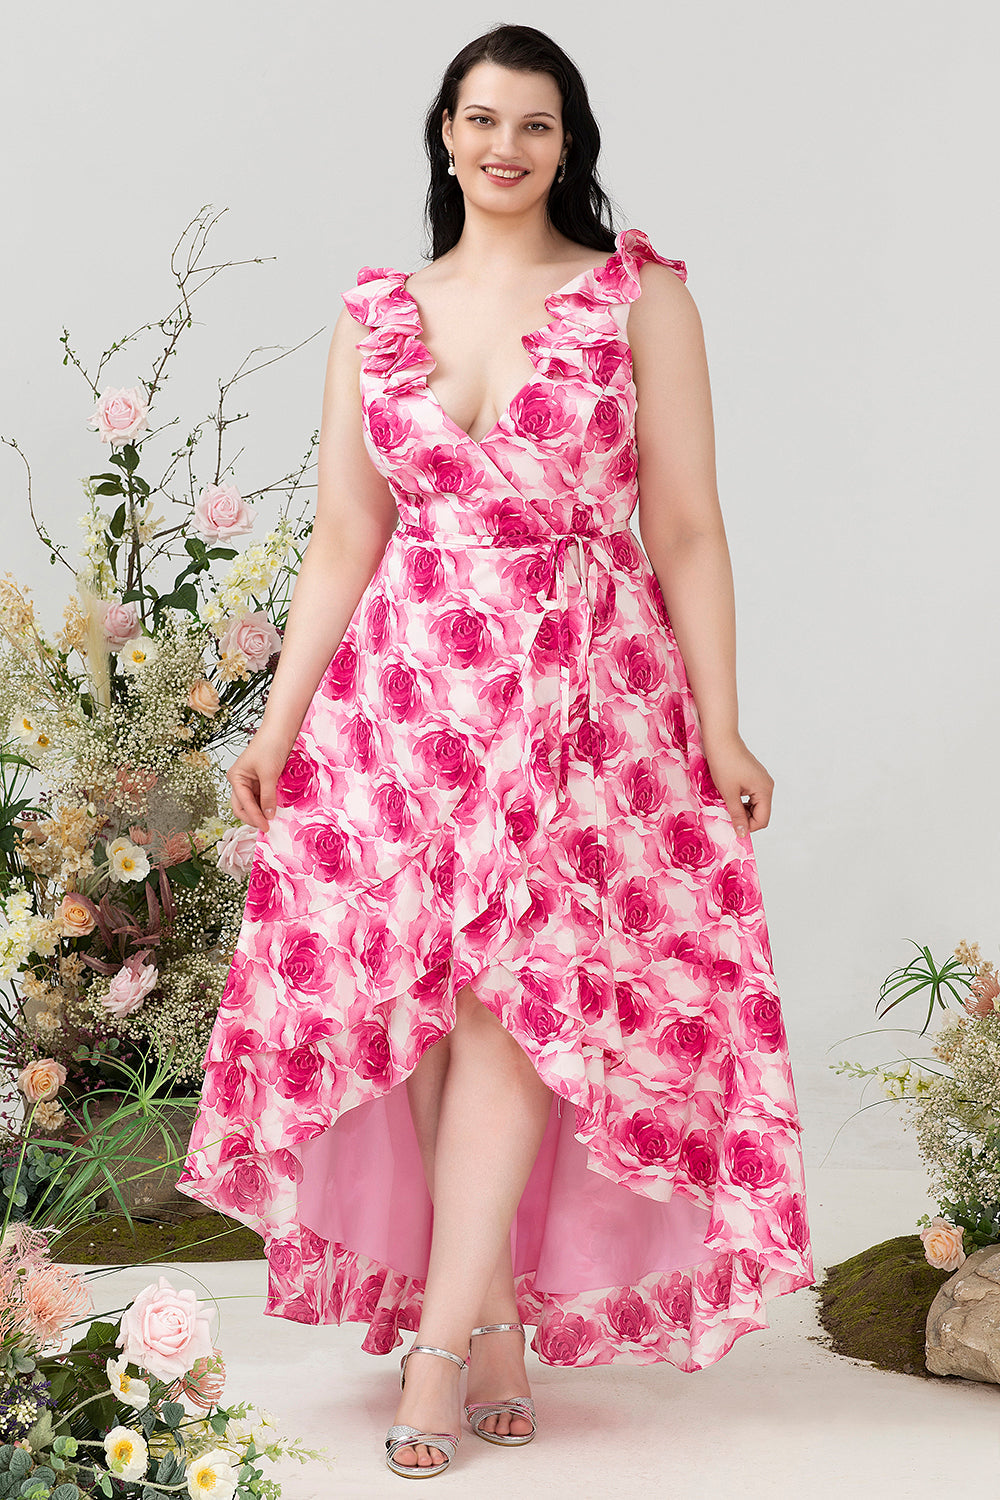 Plus Size High Low Pink Flower Printed Bridesmaid Dress with Ruffles